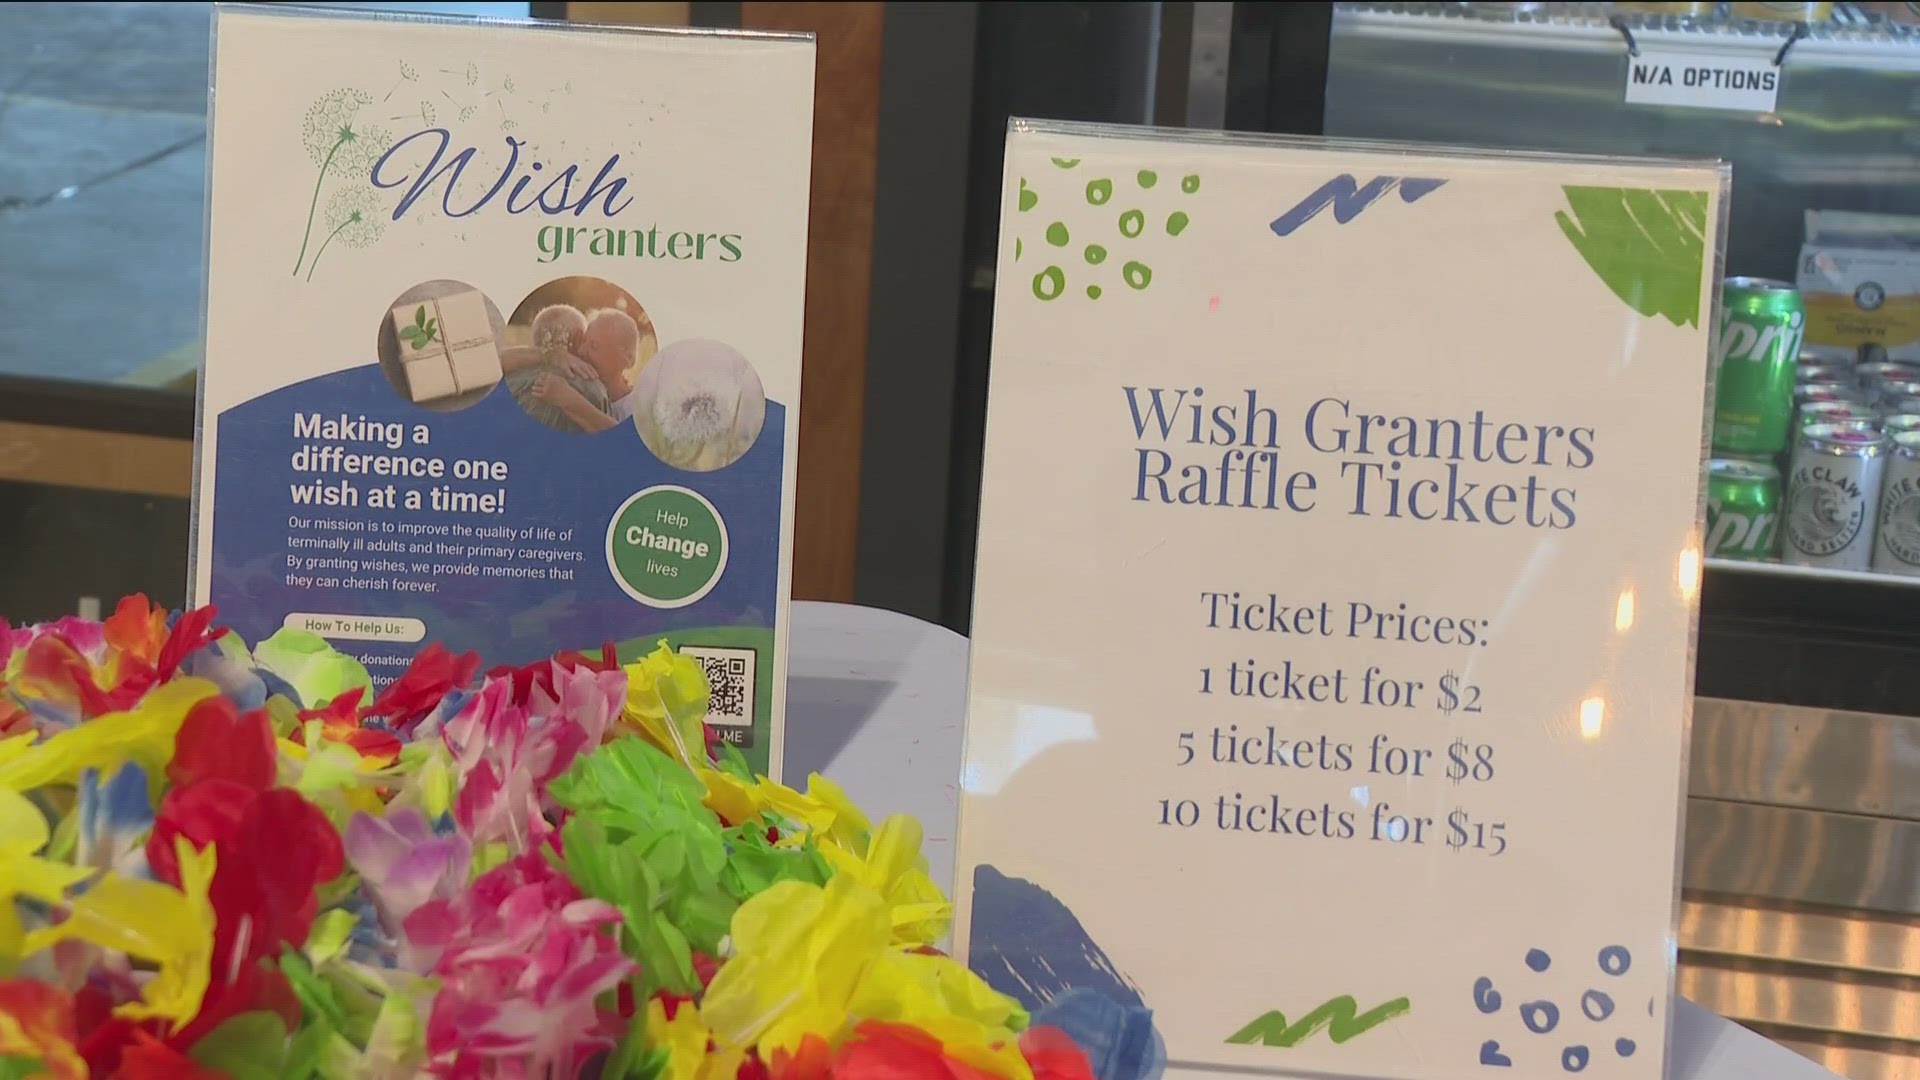 50% of proceeds from the Summer Beach Bash will be donated to Wish Granters, a Boise-based non-profit dedicated to supporting terminally-ill adults.